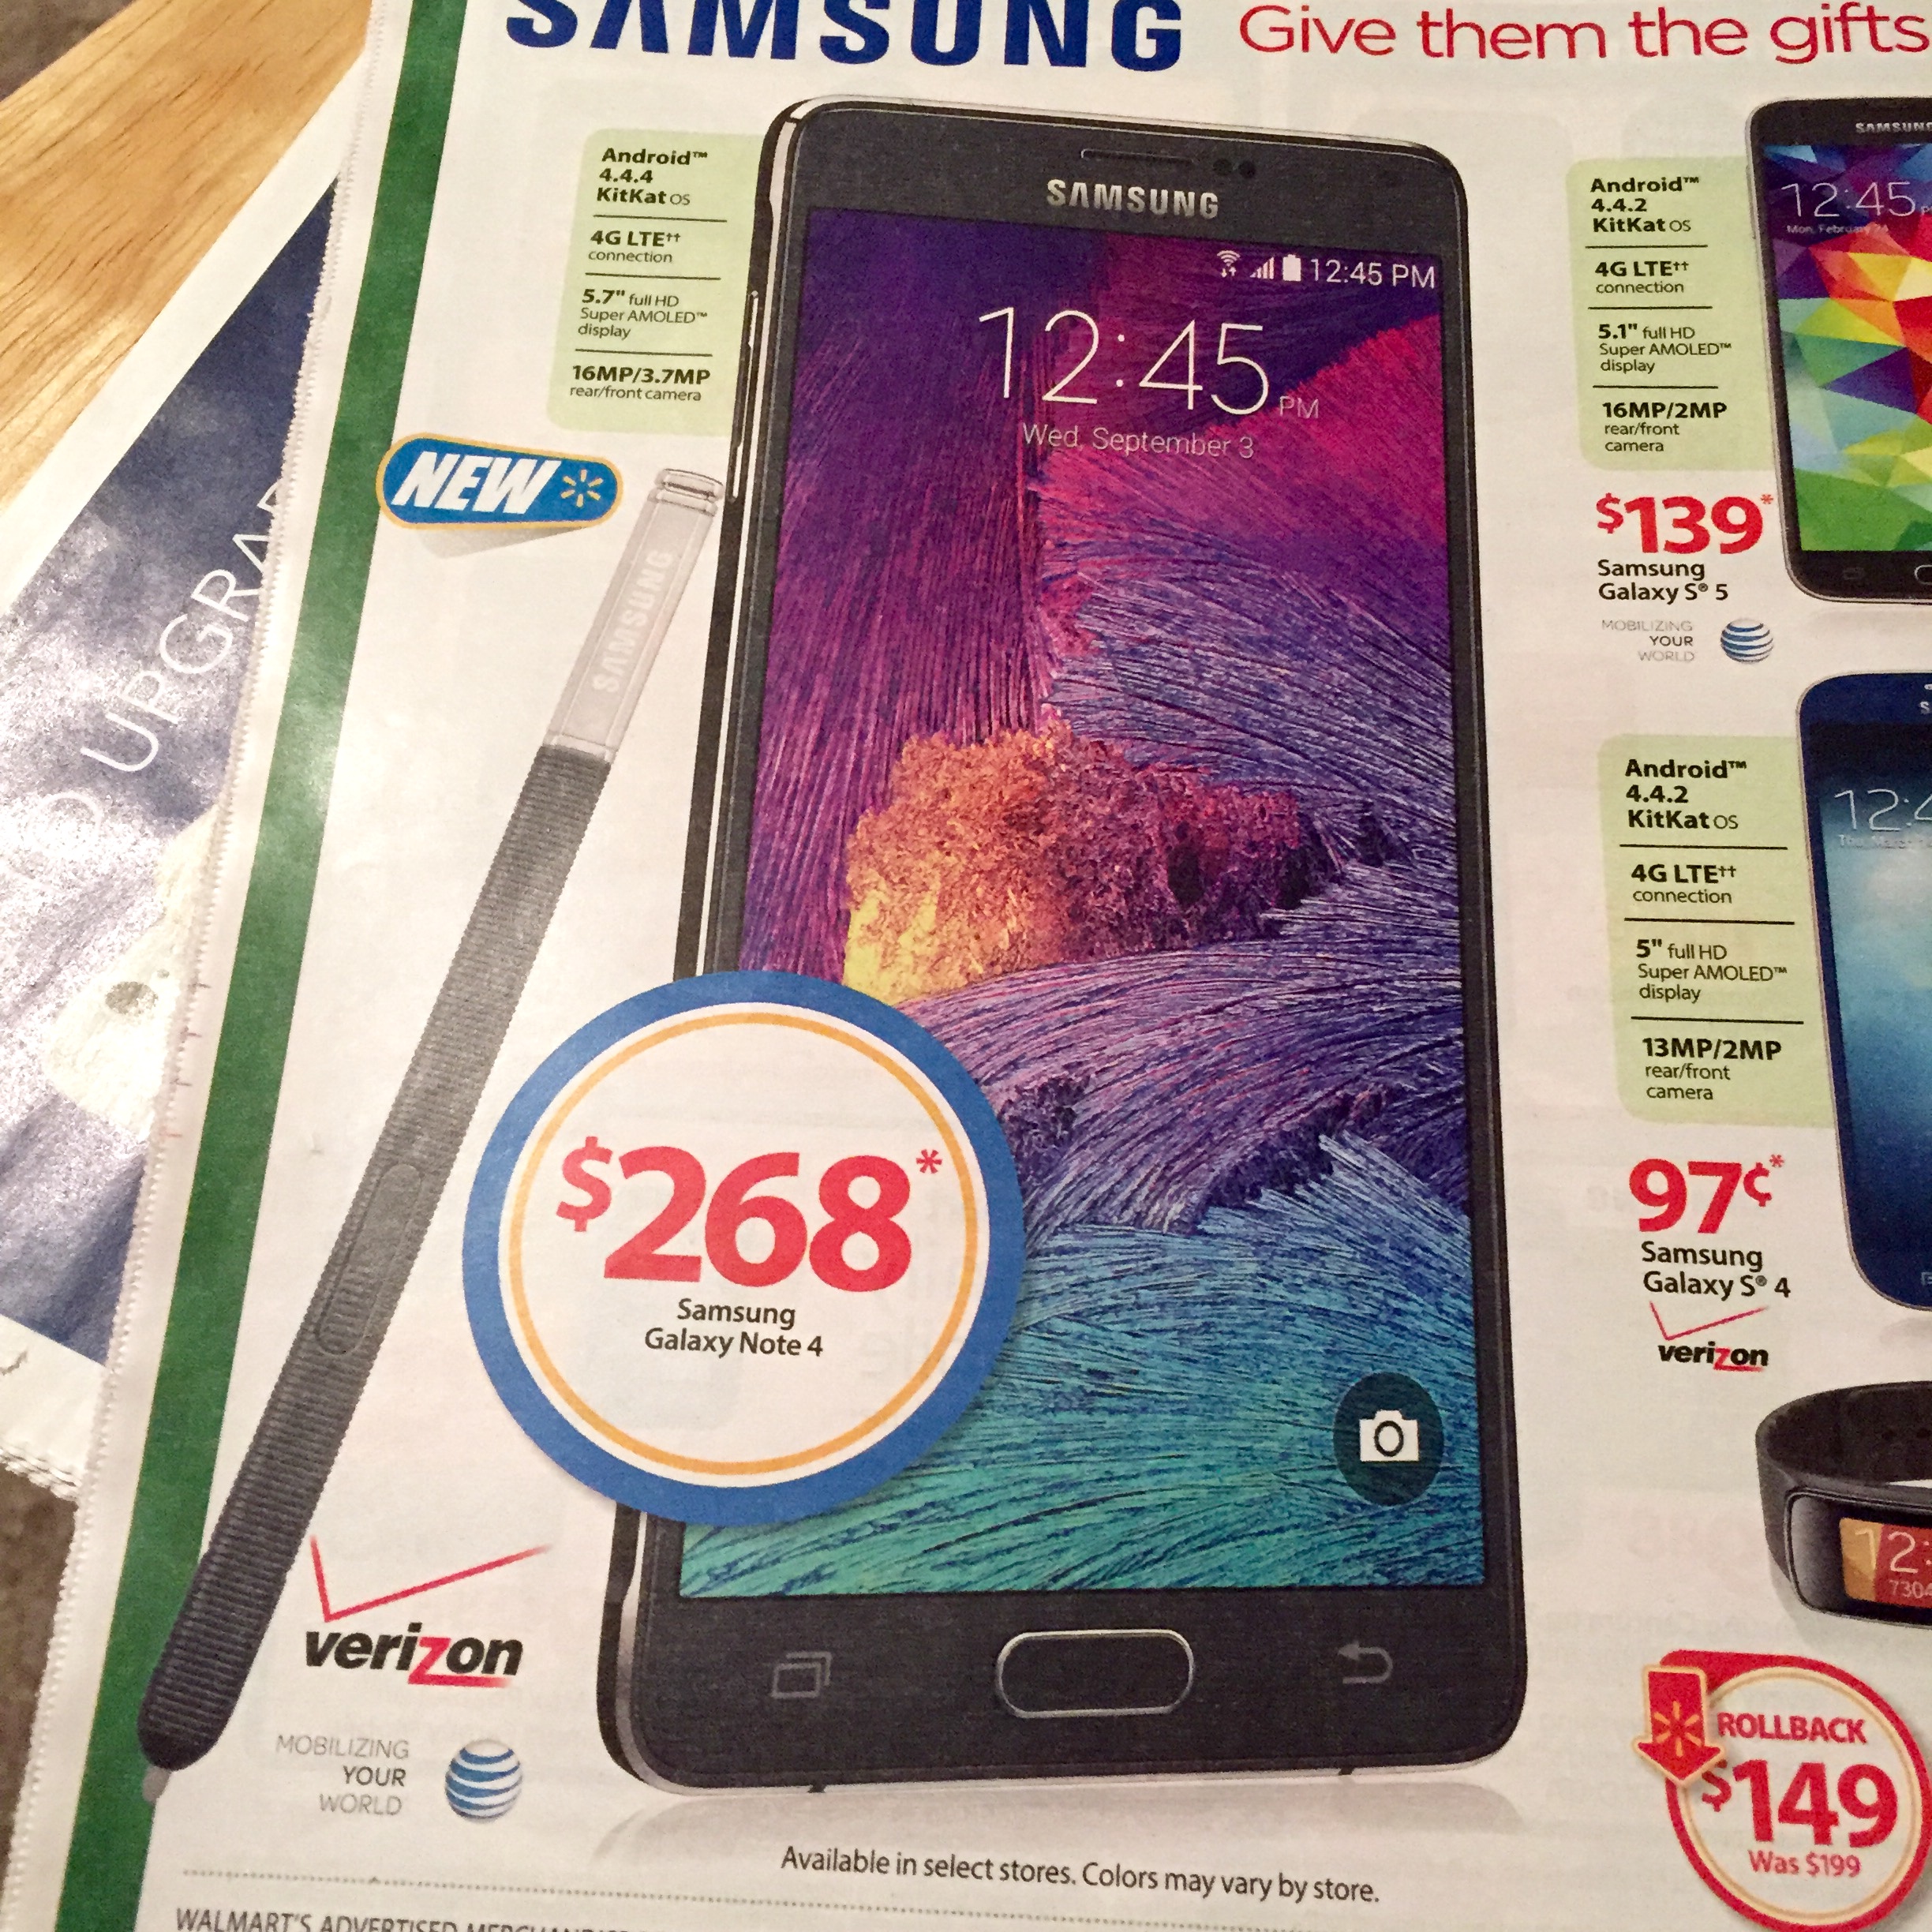 Save $40 with this Walmart Galaxy Note 4 deal.